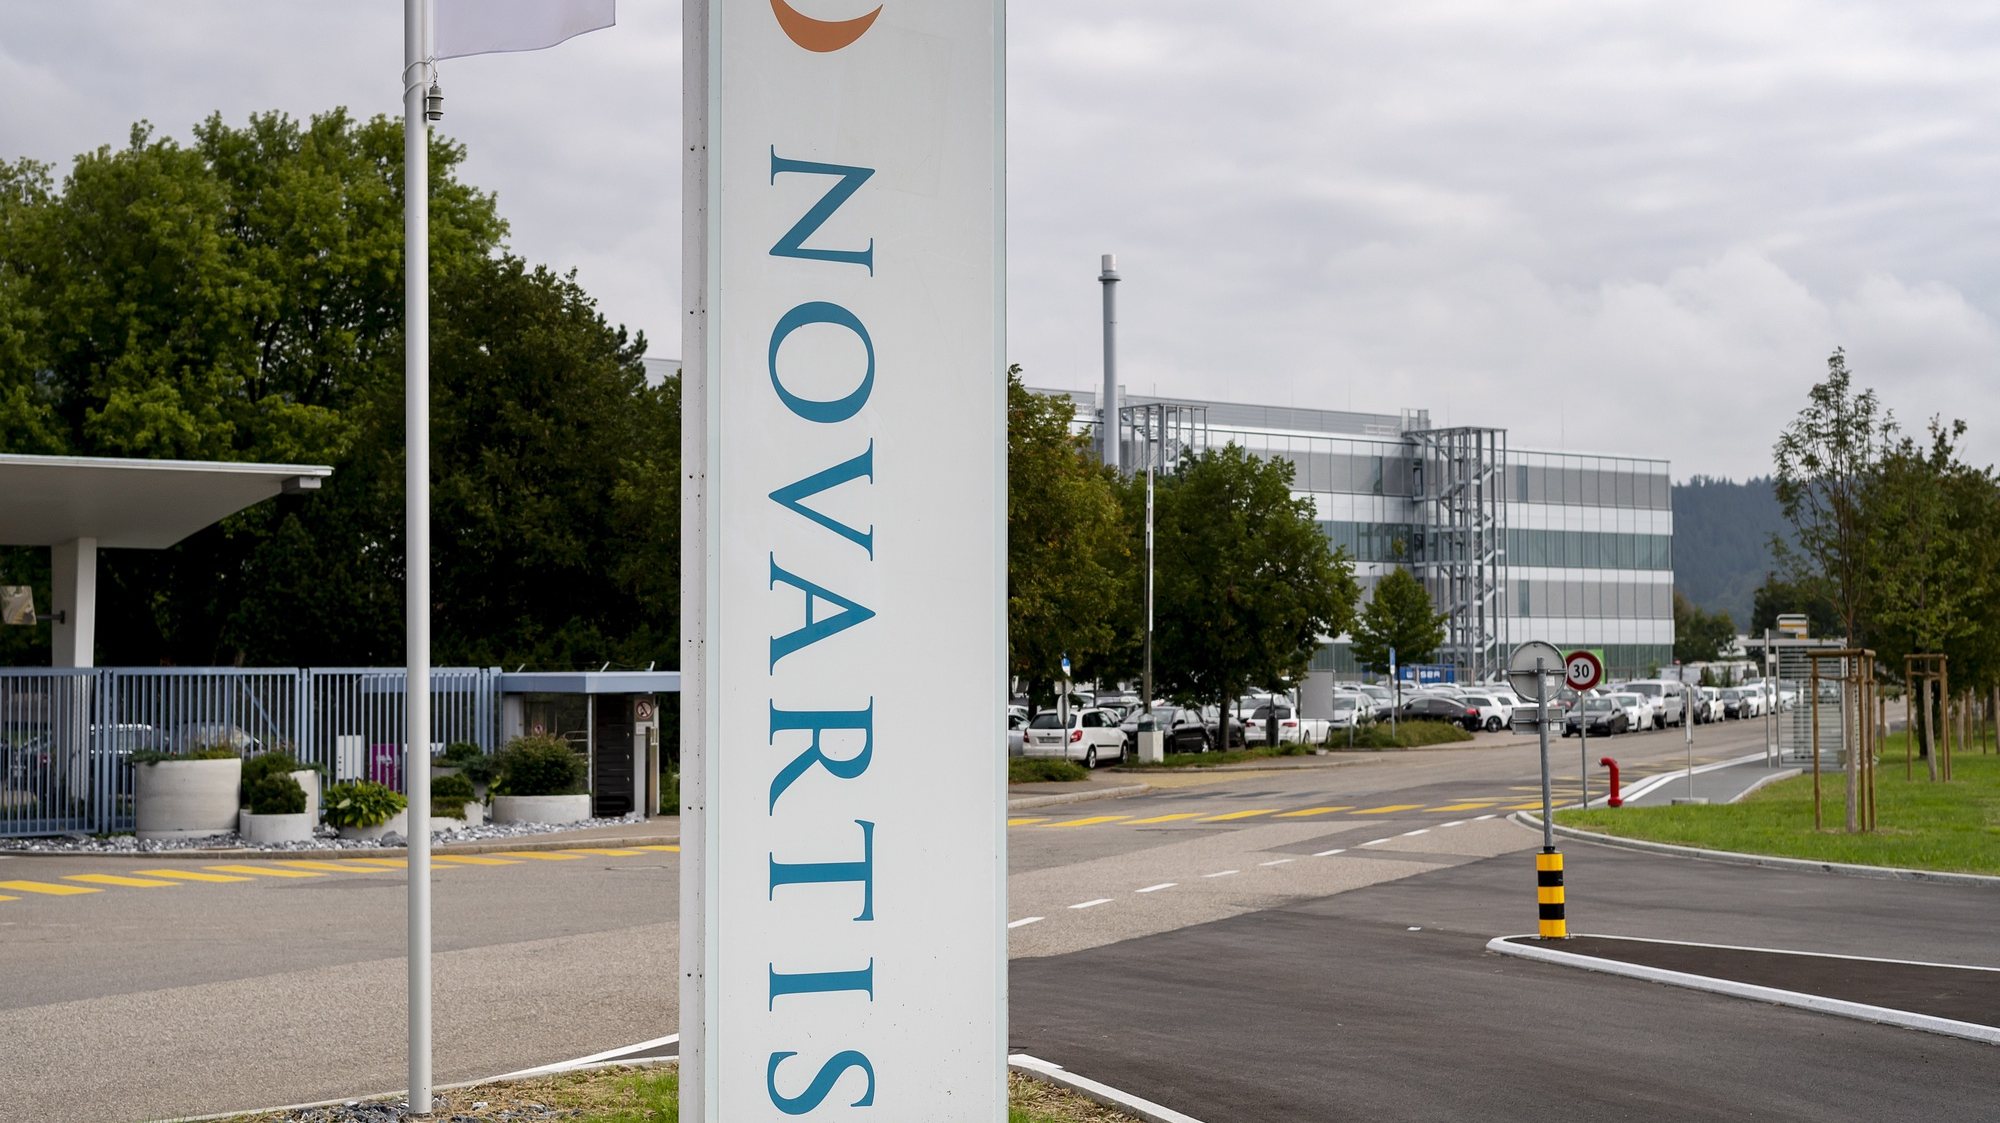 epa08324990 (FILE) - The Novartis logo is pictured in Stein, Switzerland, 03 September 2019 (reissued 26 March 2020). On 26 March 2020, Basel-based pharmaceutical giant Novartis announced to have joined forces with the Bill &amp; Melinda Gates Foundation to fight the coronavirus pandemic.  EPA/GEORGIOS KEFALAS